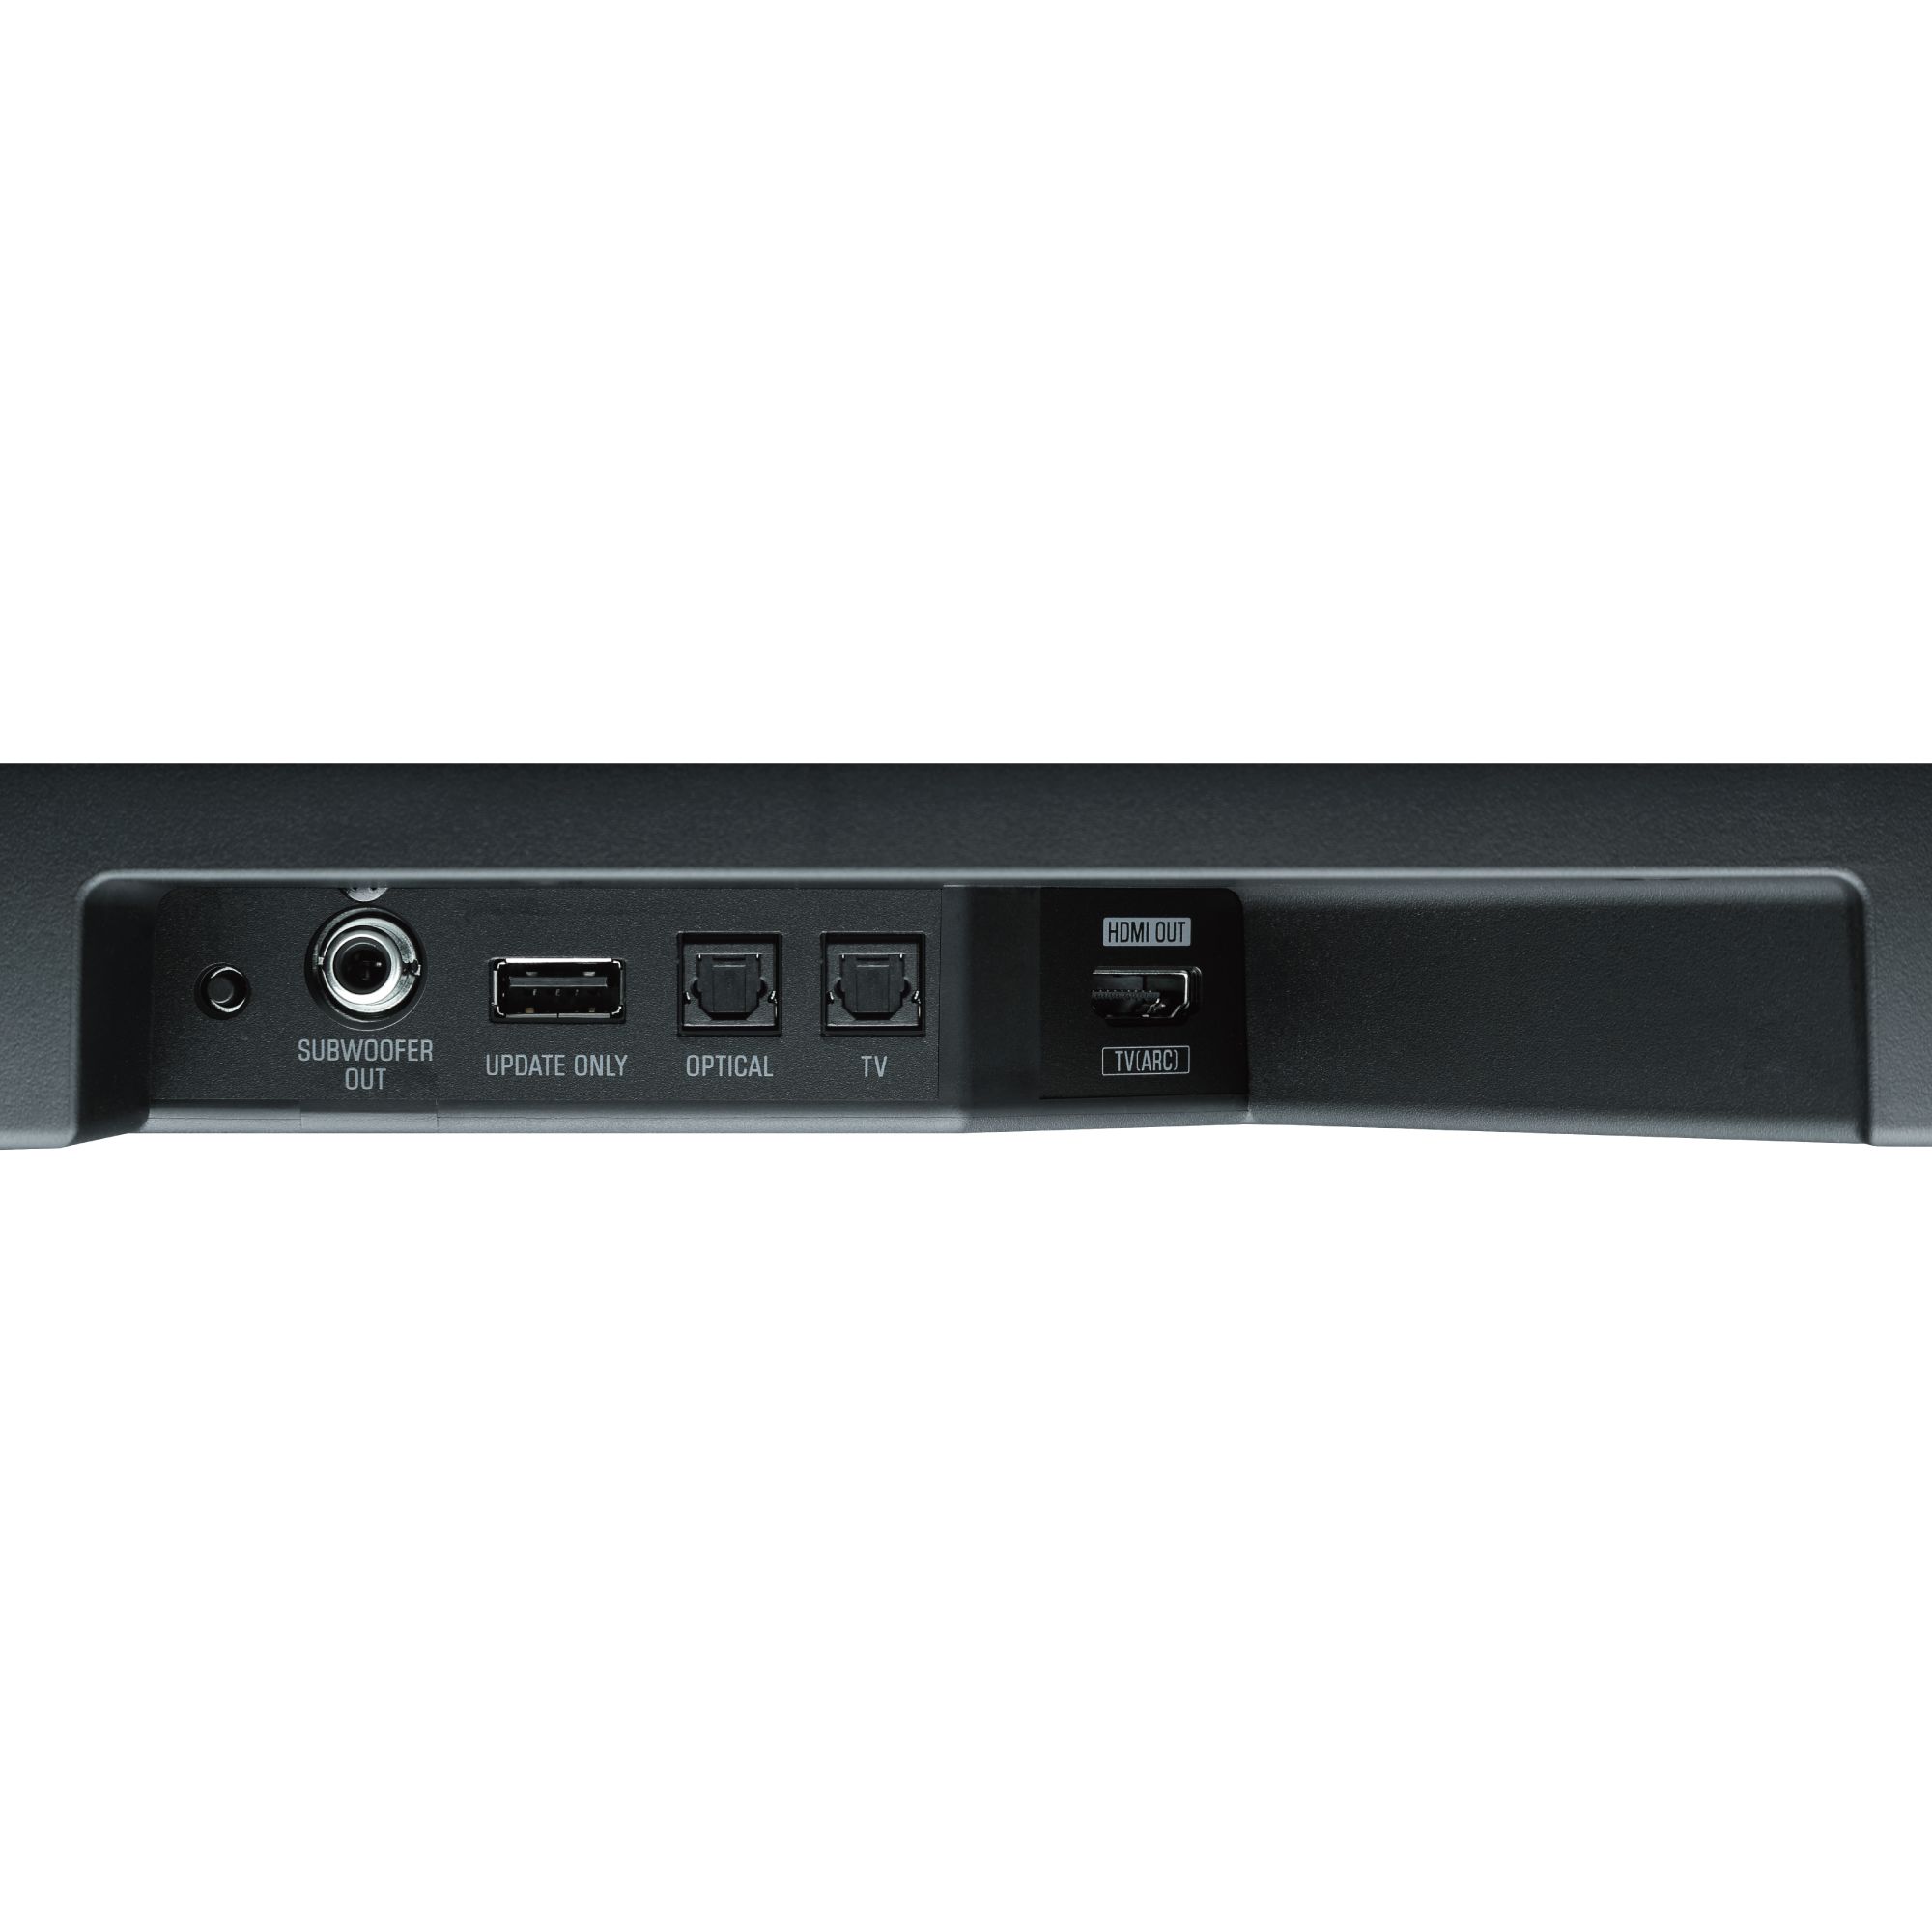 SR-B20A - Overview - Sound Bars - Audio & Visual - Products 